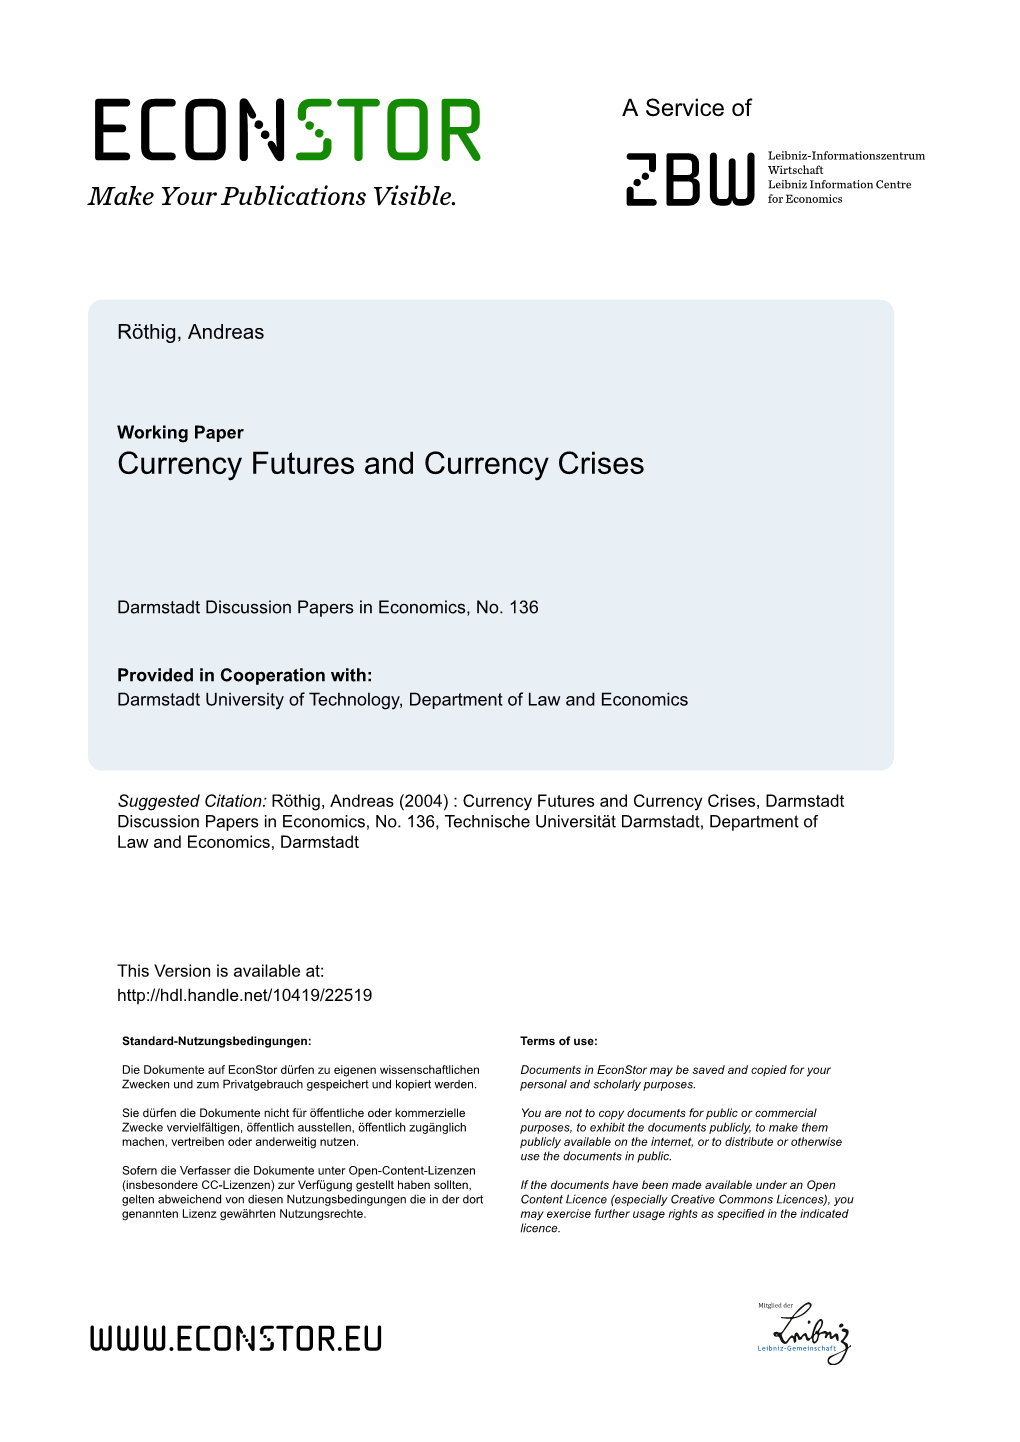 Currency Futures and Currency Crises